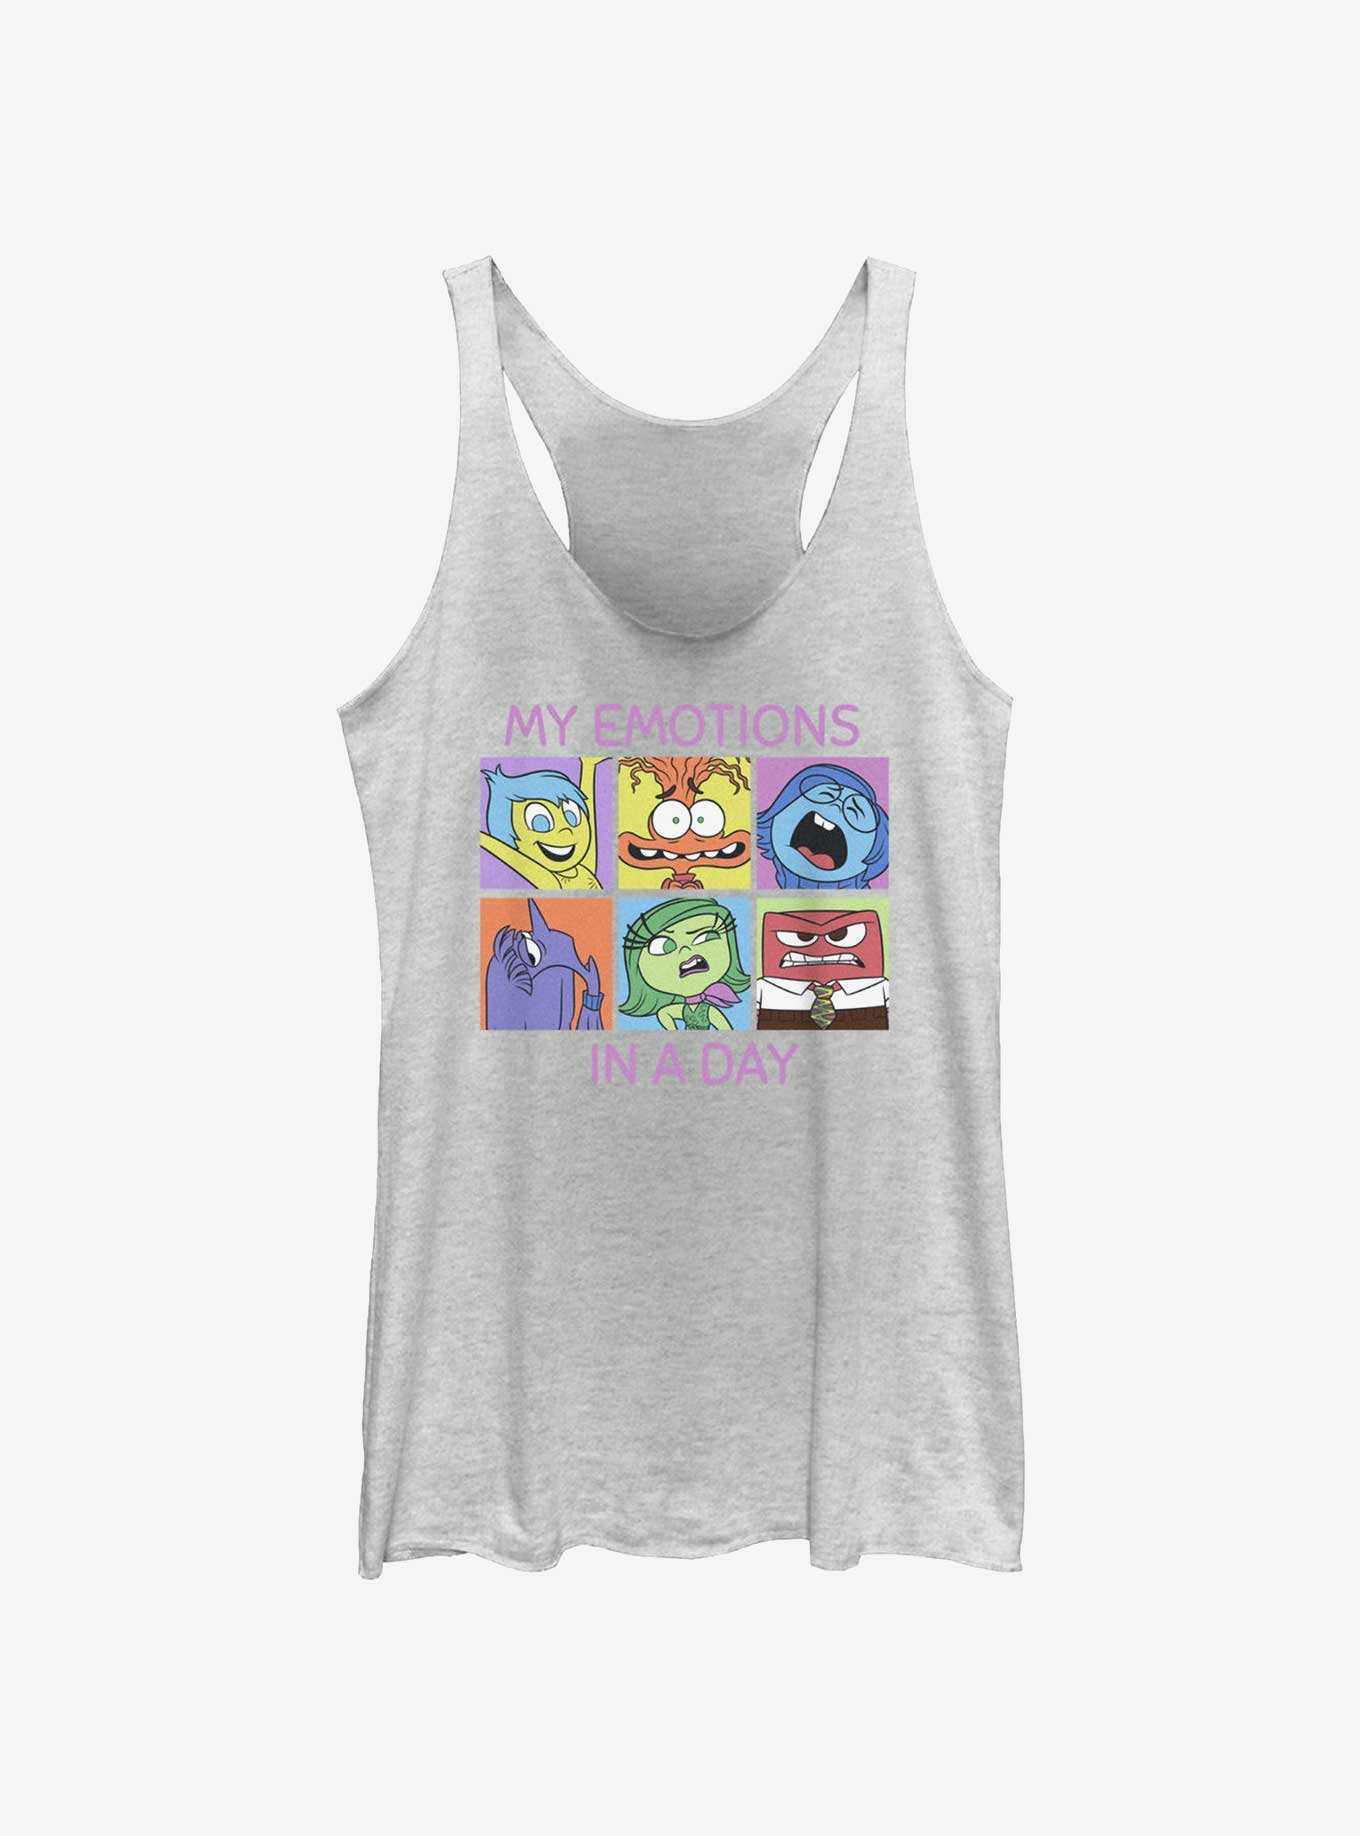 Disney Pixar Inside Out 2 My Emotions In A Day Girls Tank, , hi-res